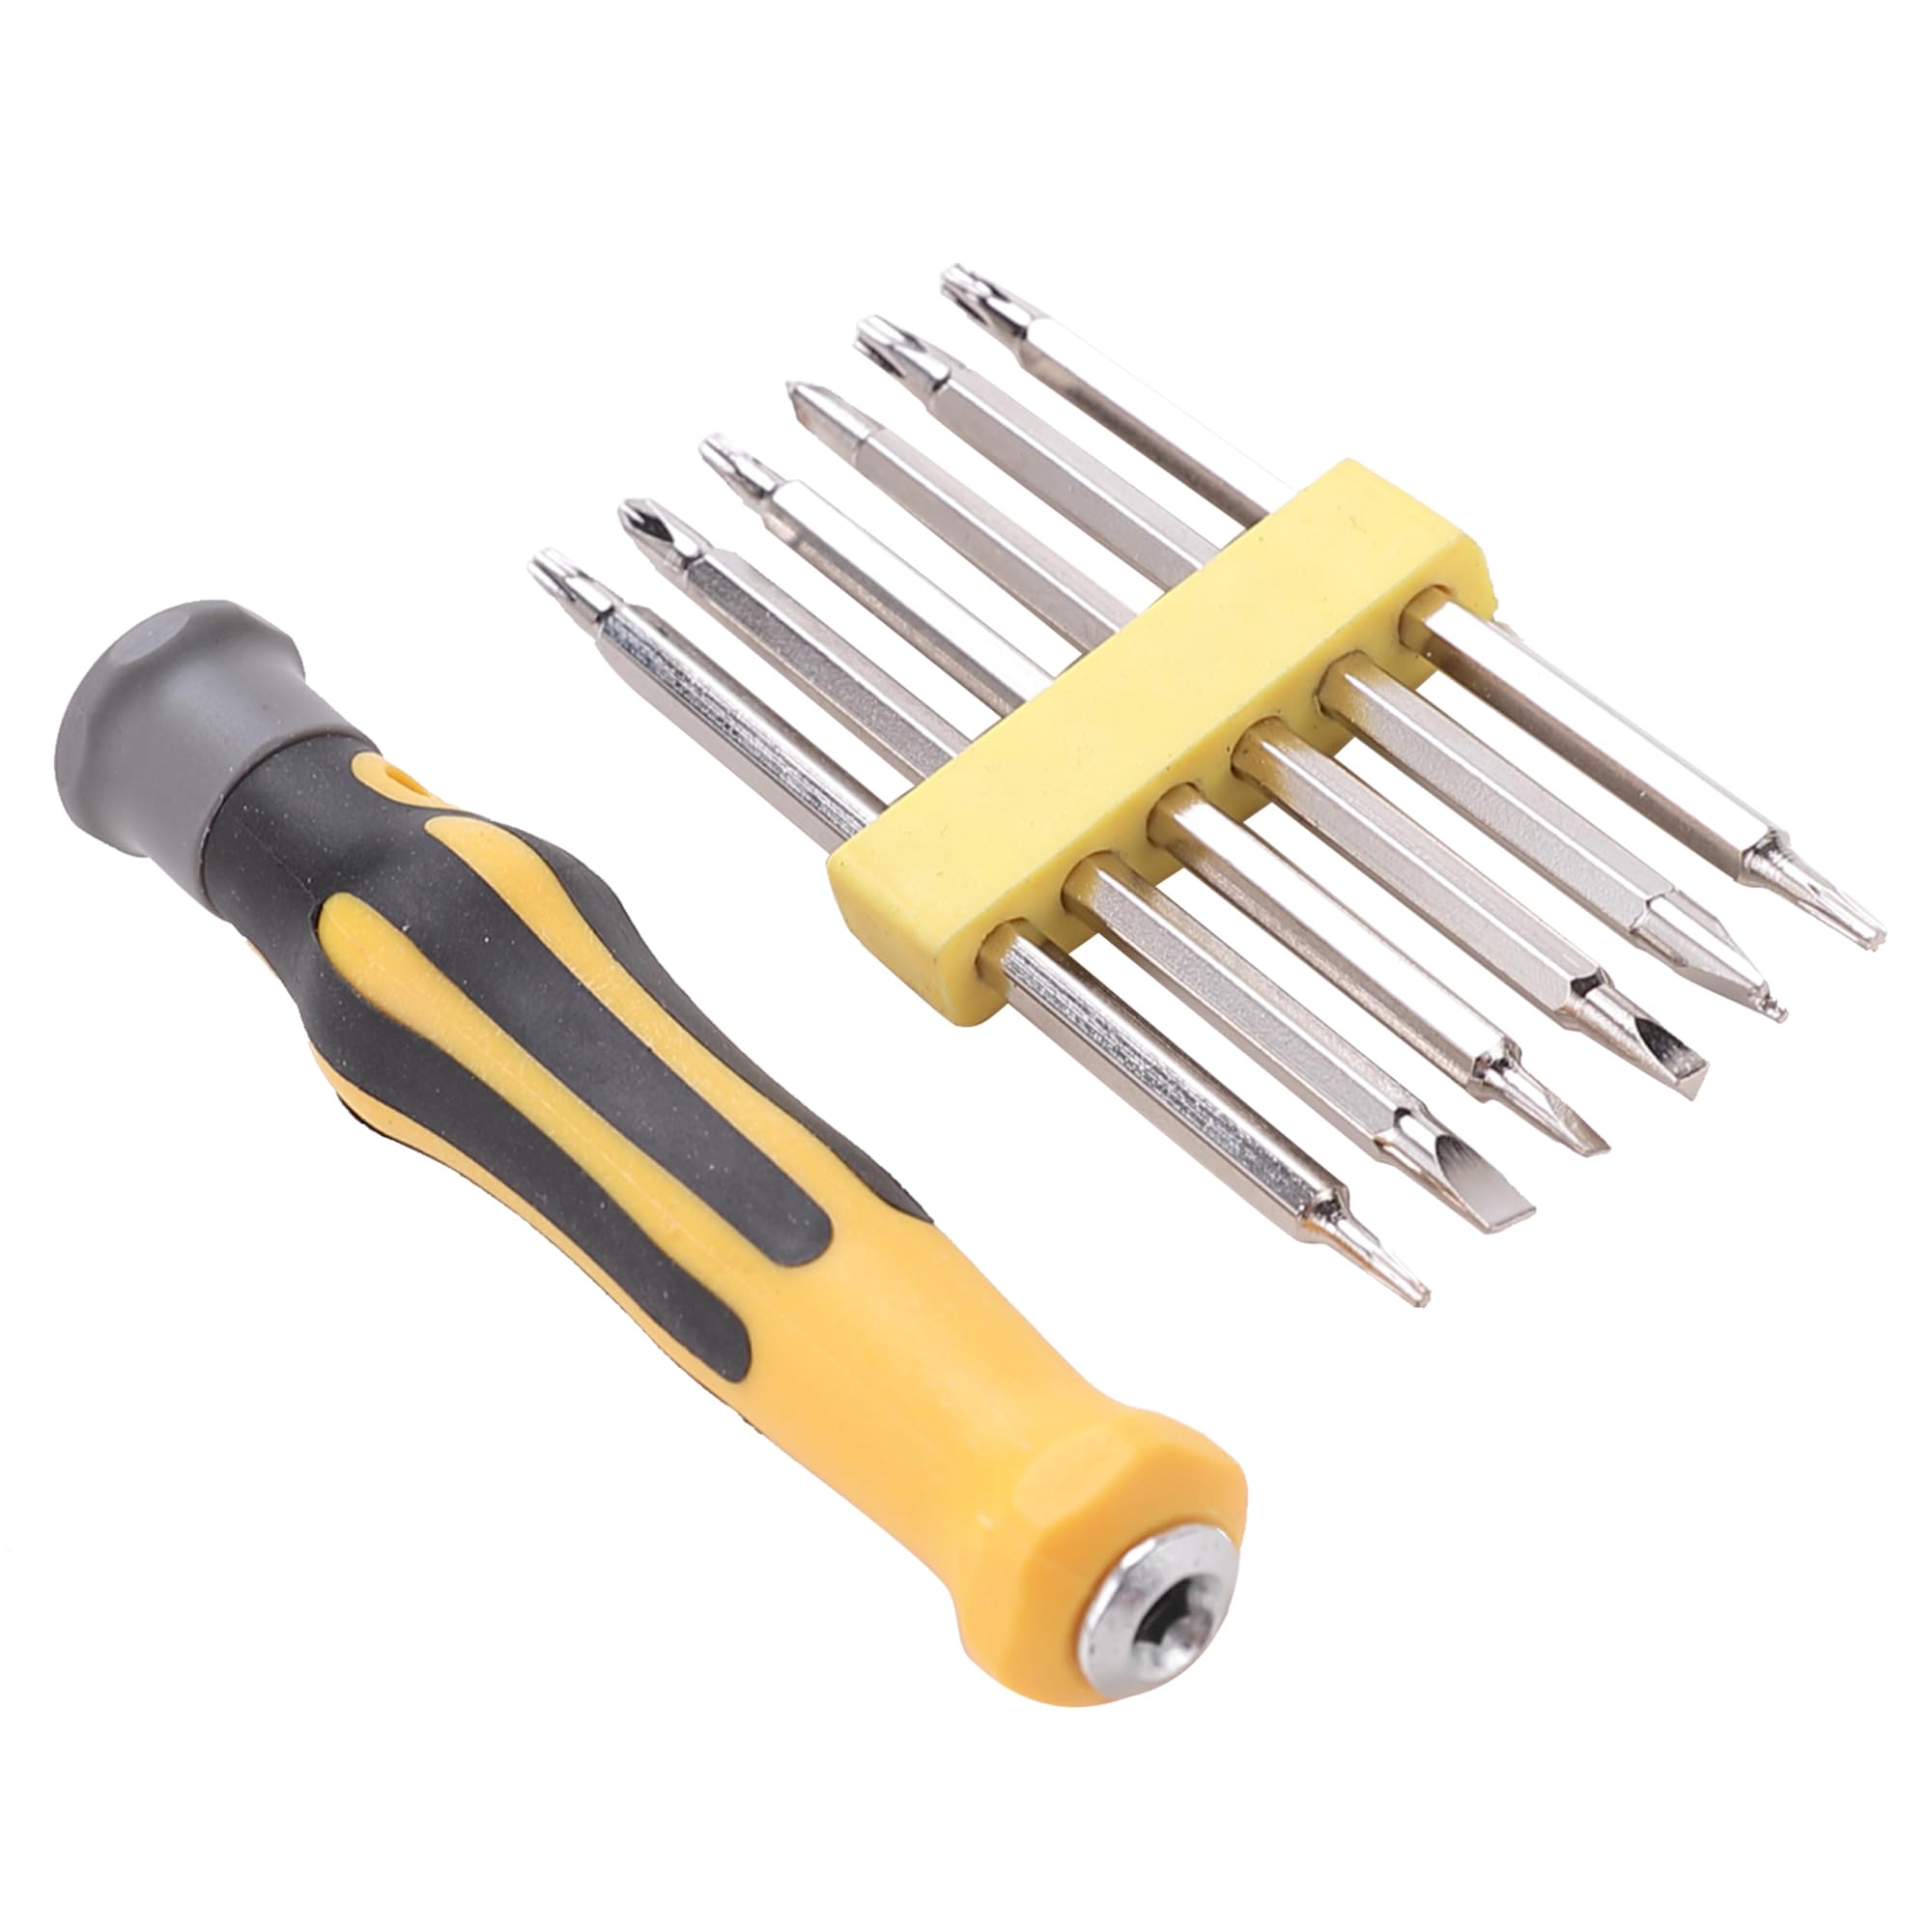 Cheston 12-in-1 Screwdriver Set | Interchangeable Bars blades 12pc Screwdriver for Home Long Blades Repair Compact Kit for Fixing Electronics, Laptops, Machines PC | Multipurpose Hand Tool Kit